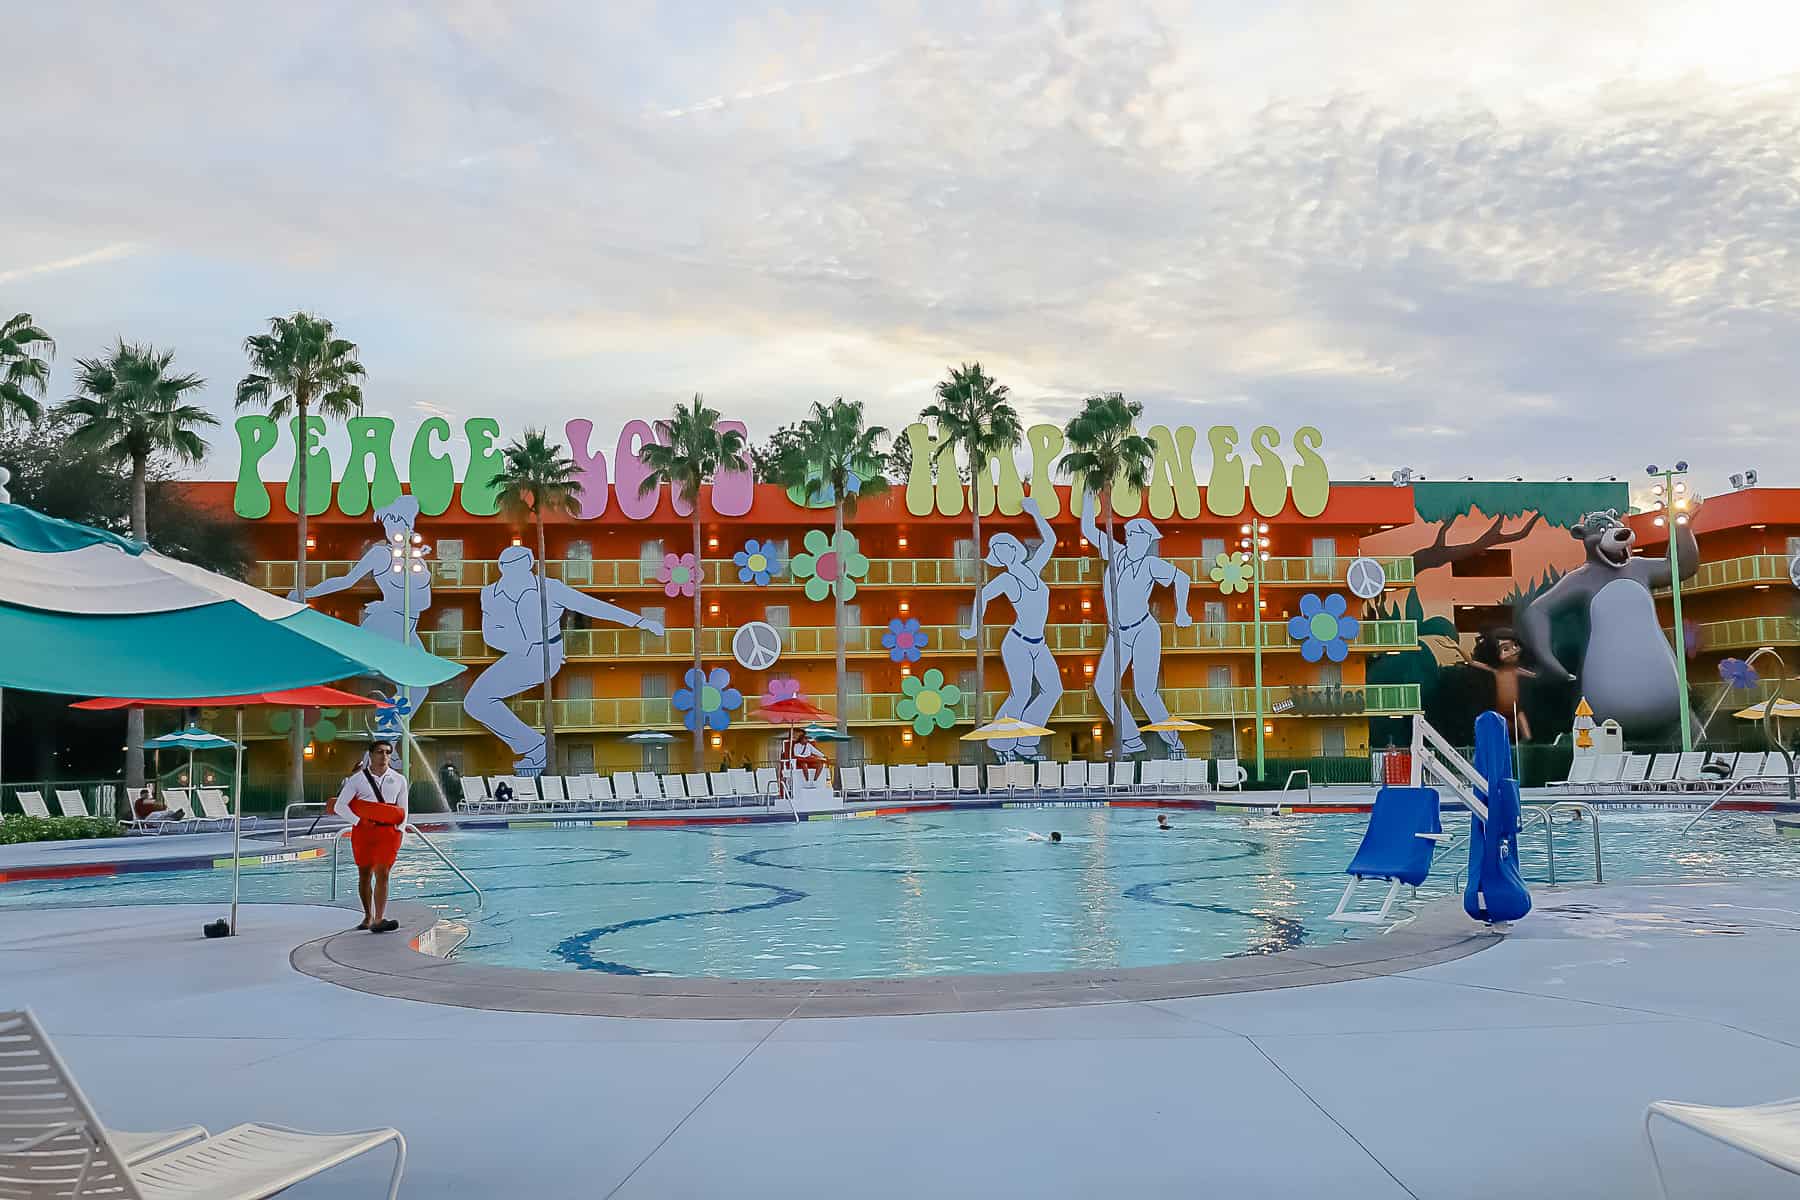 The Hippy Dippy Pool is shaped like a flower petal. 